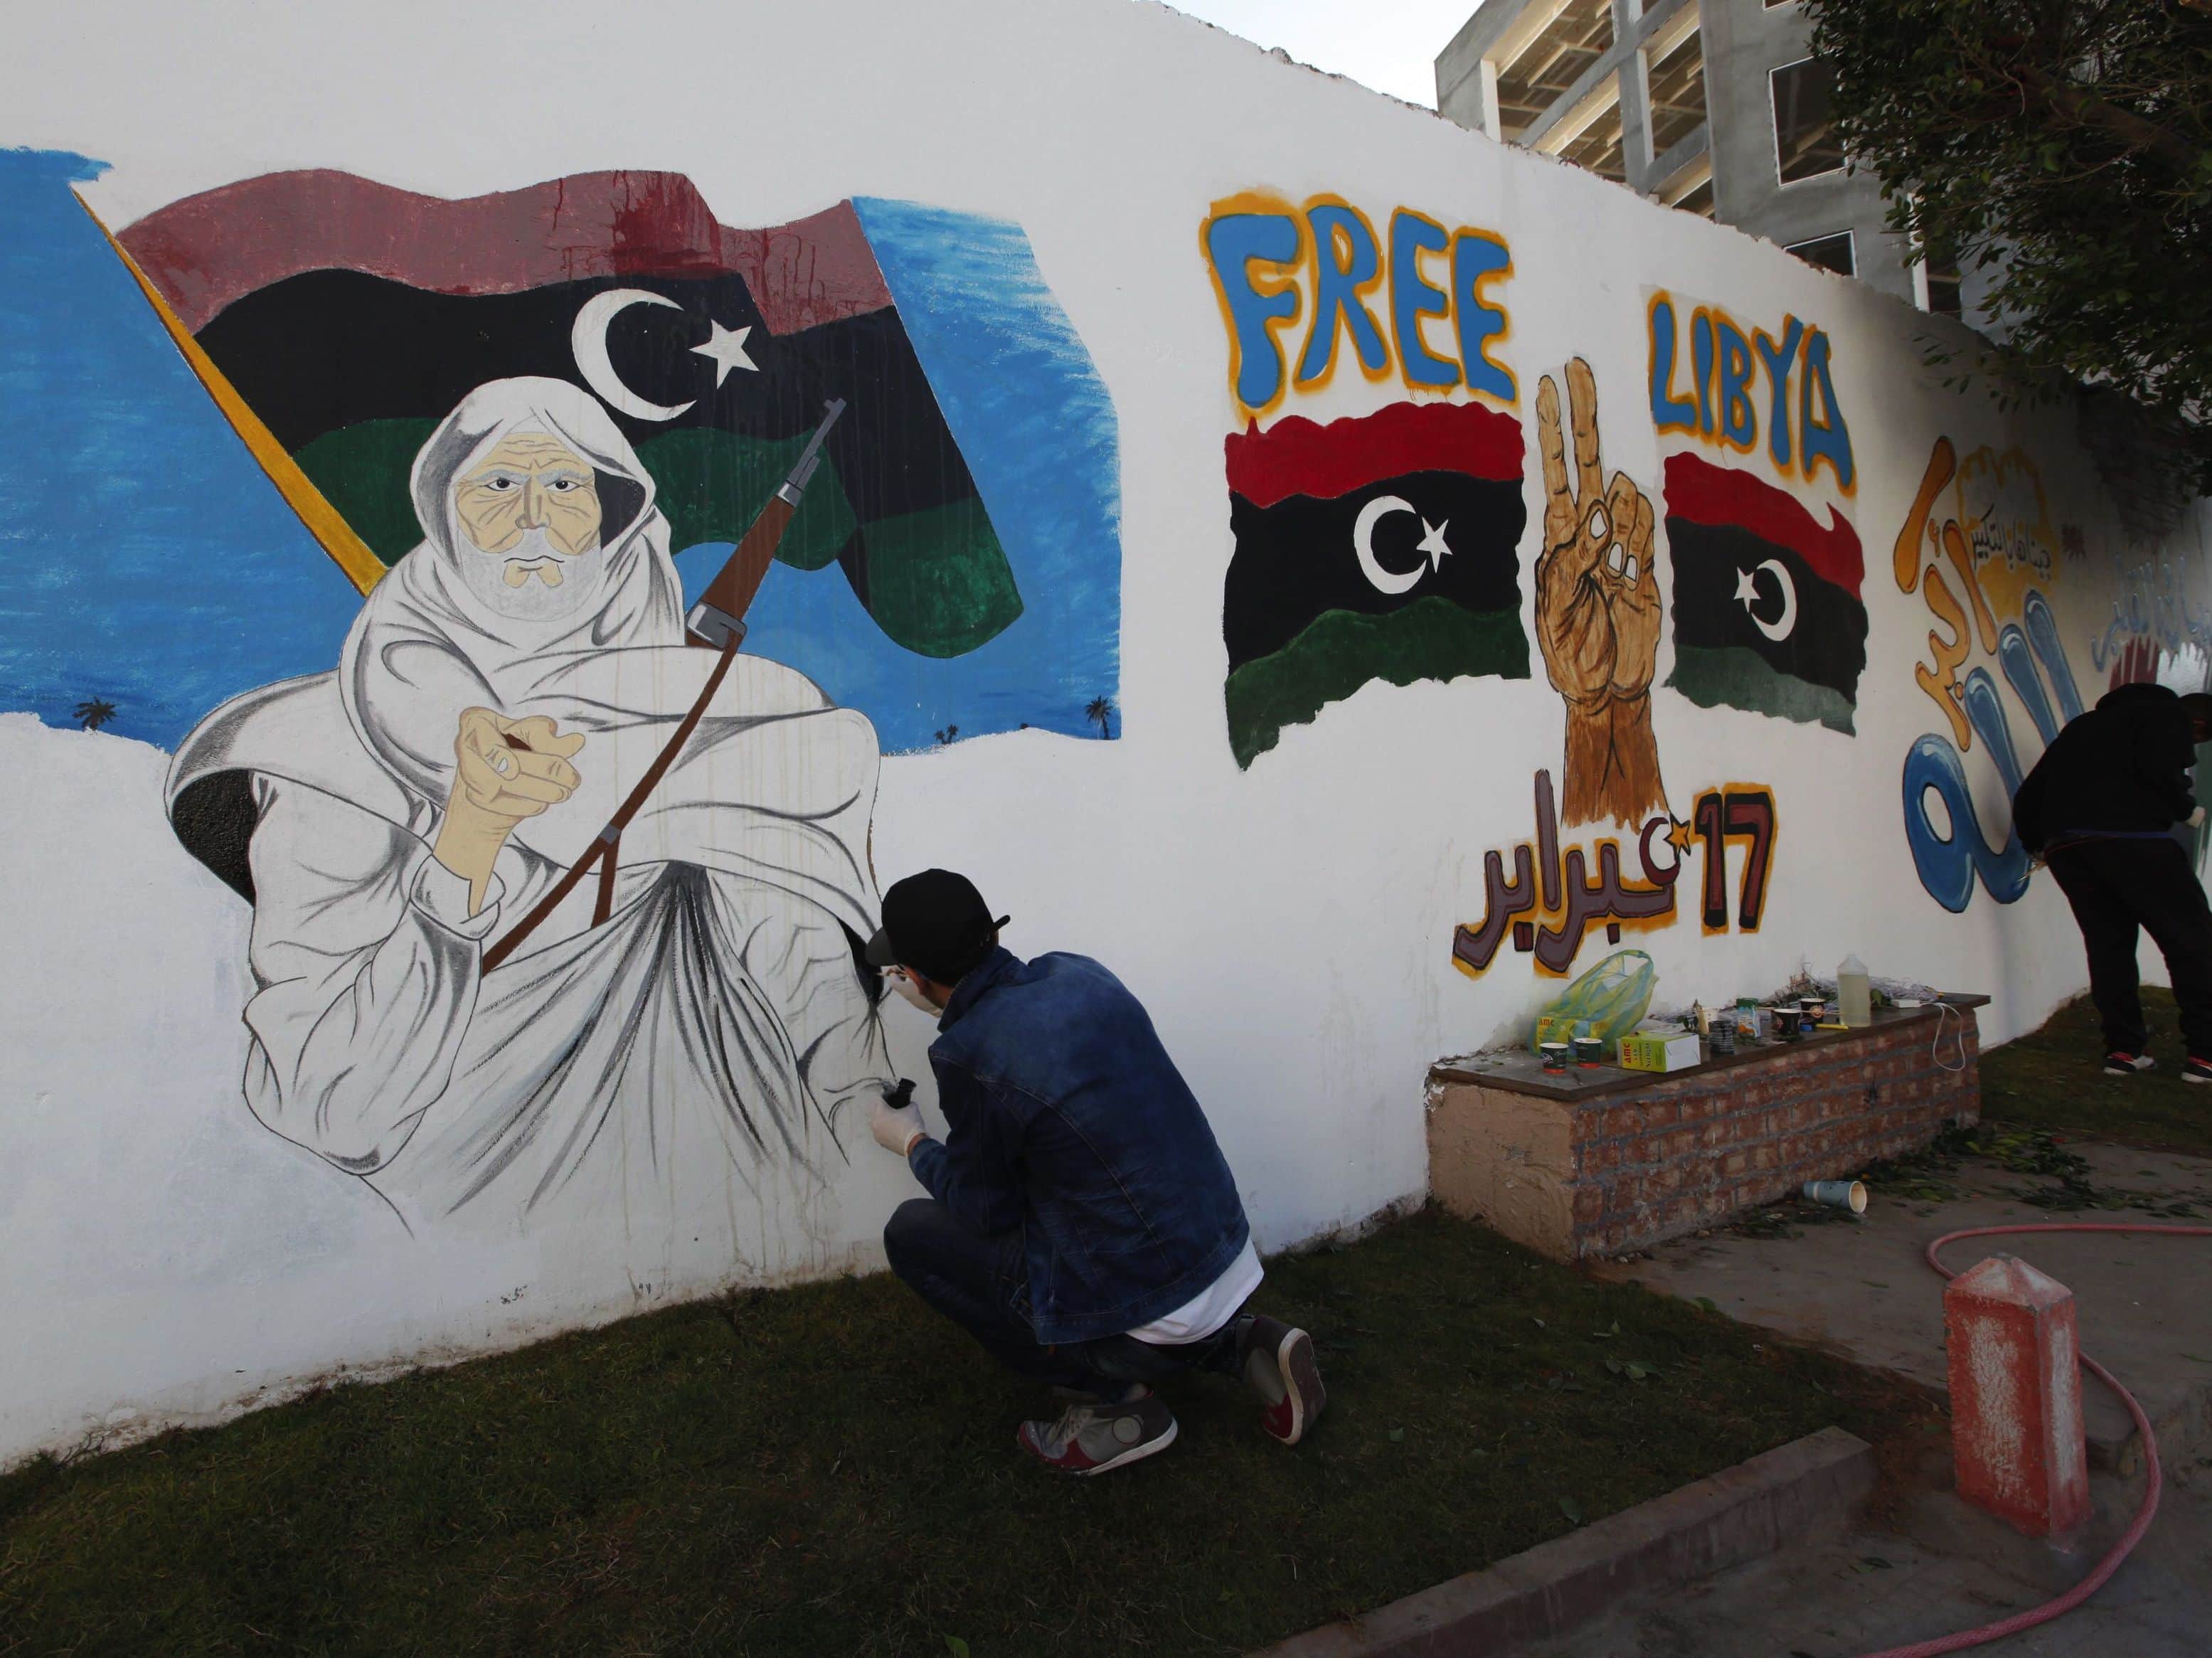 Libyans draw graffiti on a wall along a street in the capital Tripoli in preparation for celebrations of the third anniversary of the February 17 revolution, REUTERS/Ismail Zitouny